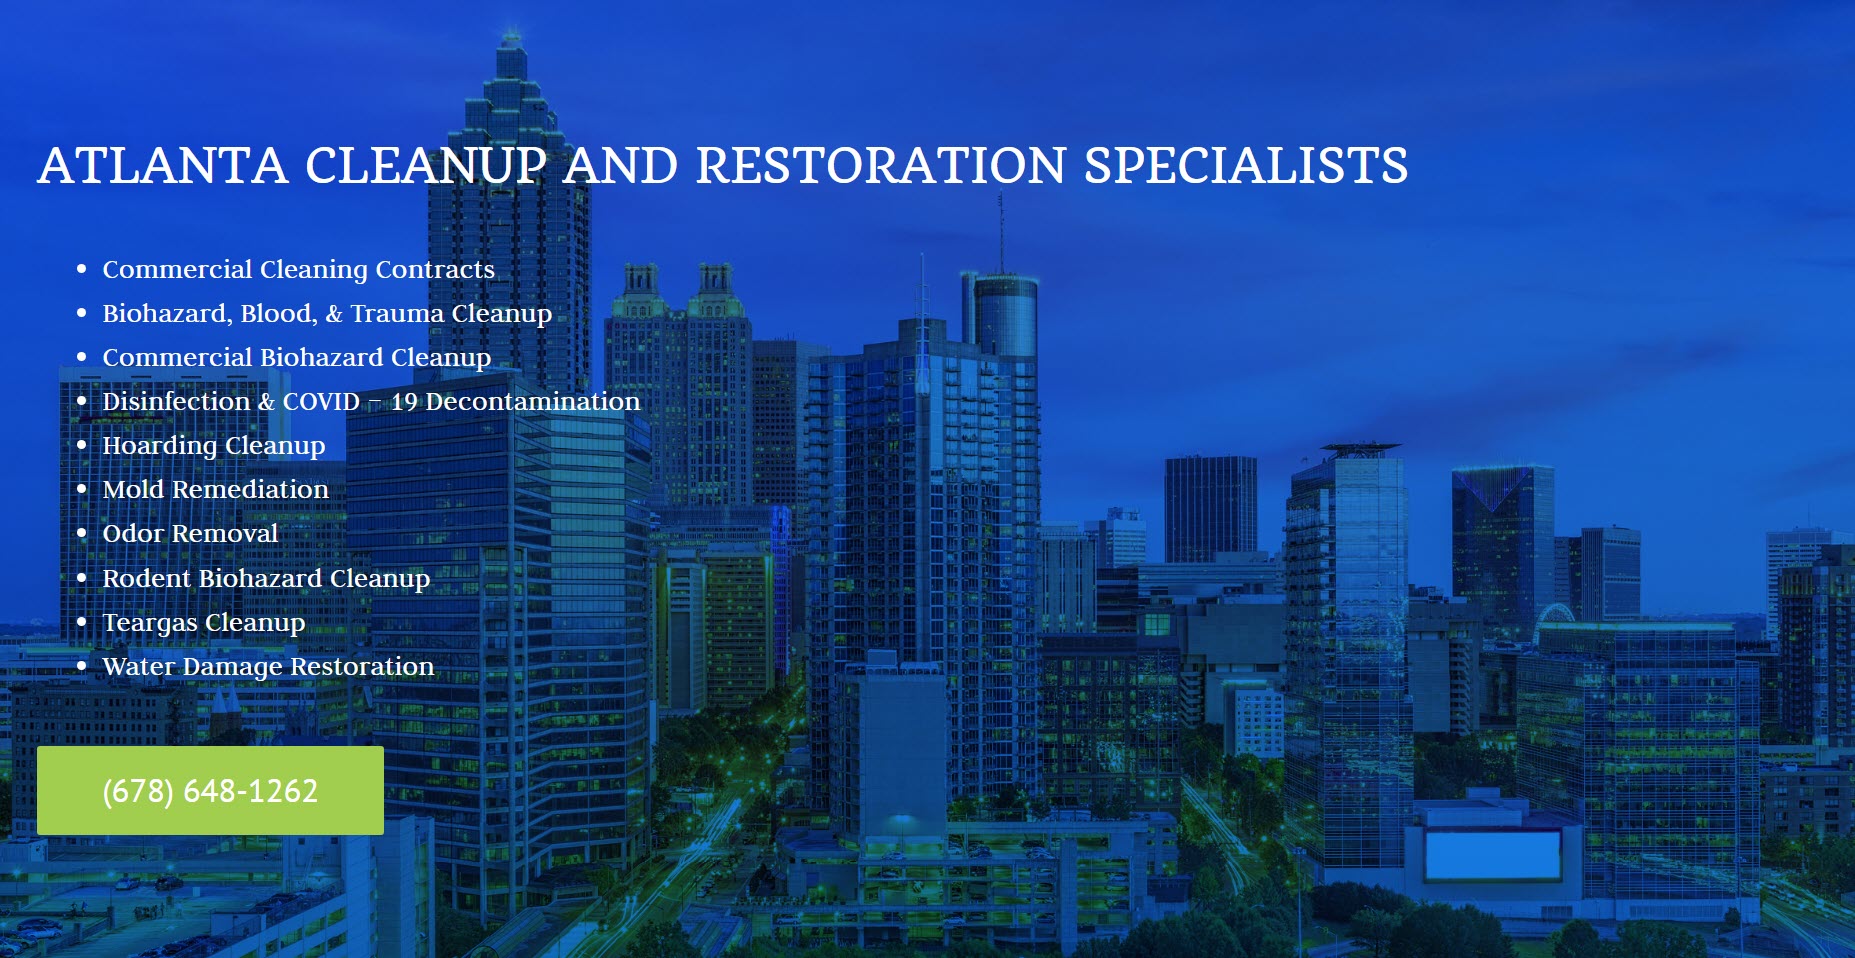 Image showing a city skyline with a list of services provided by "Atlanta Cleanup and Restoration Specialists" overlayed, including biohazard cleanup, mold restoration, and water damage restoration. -PureOneServices